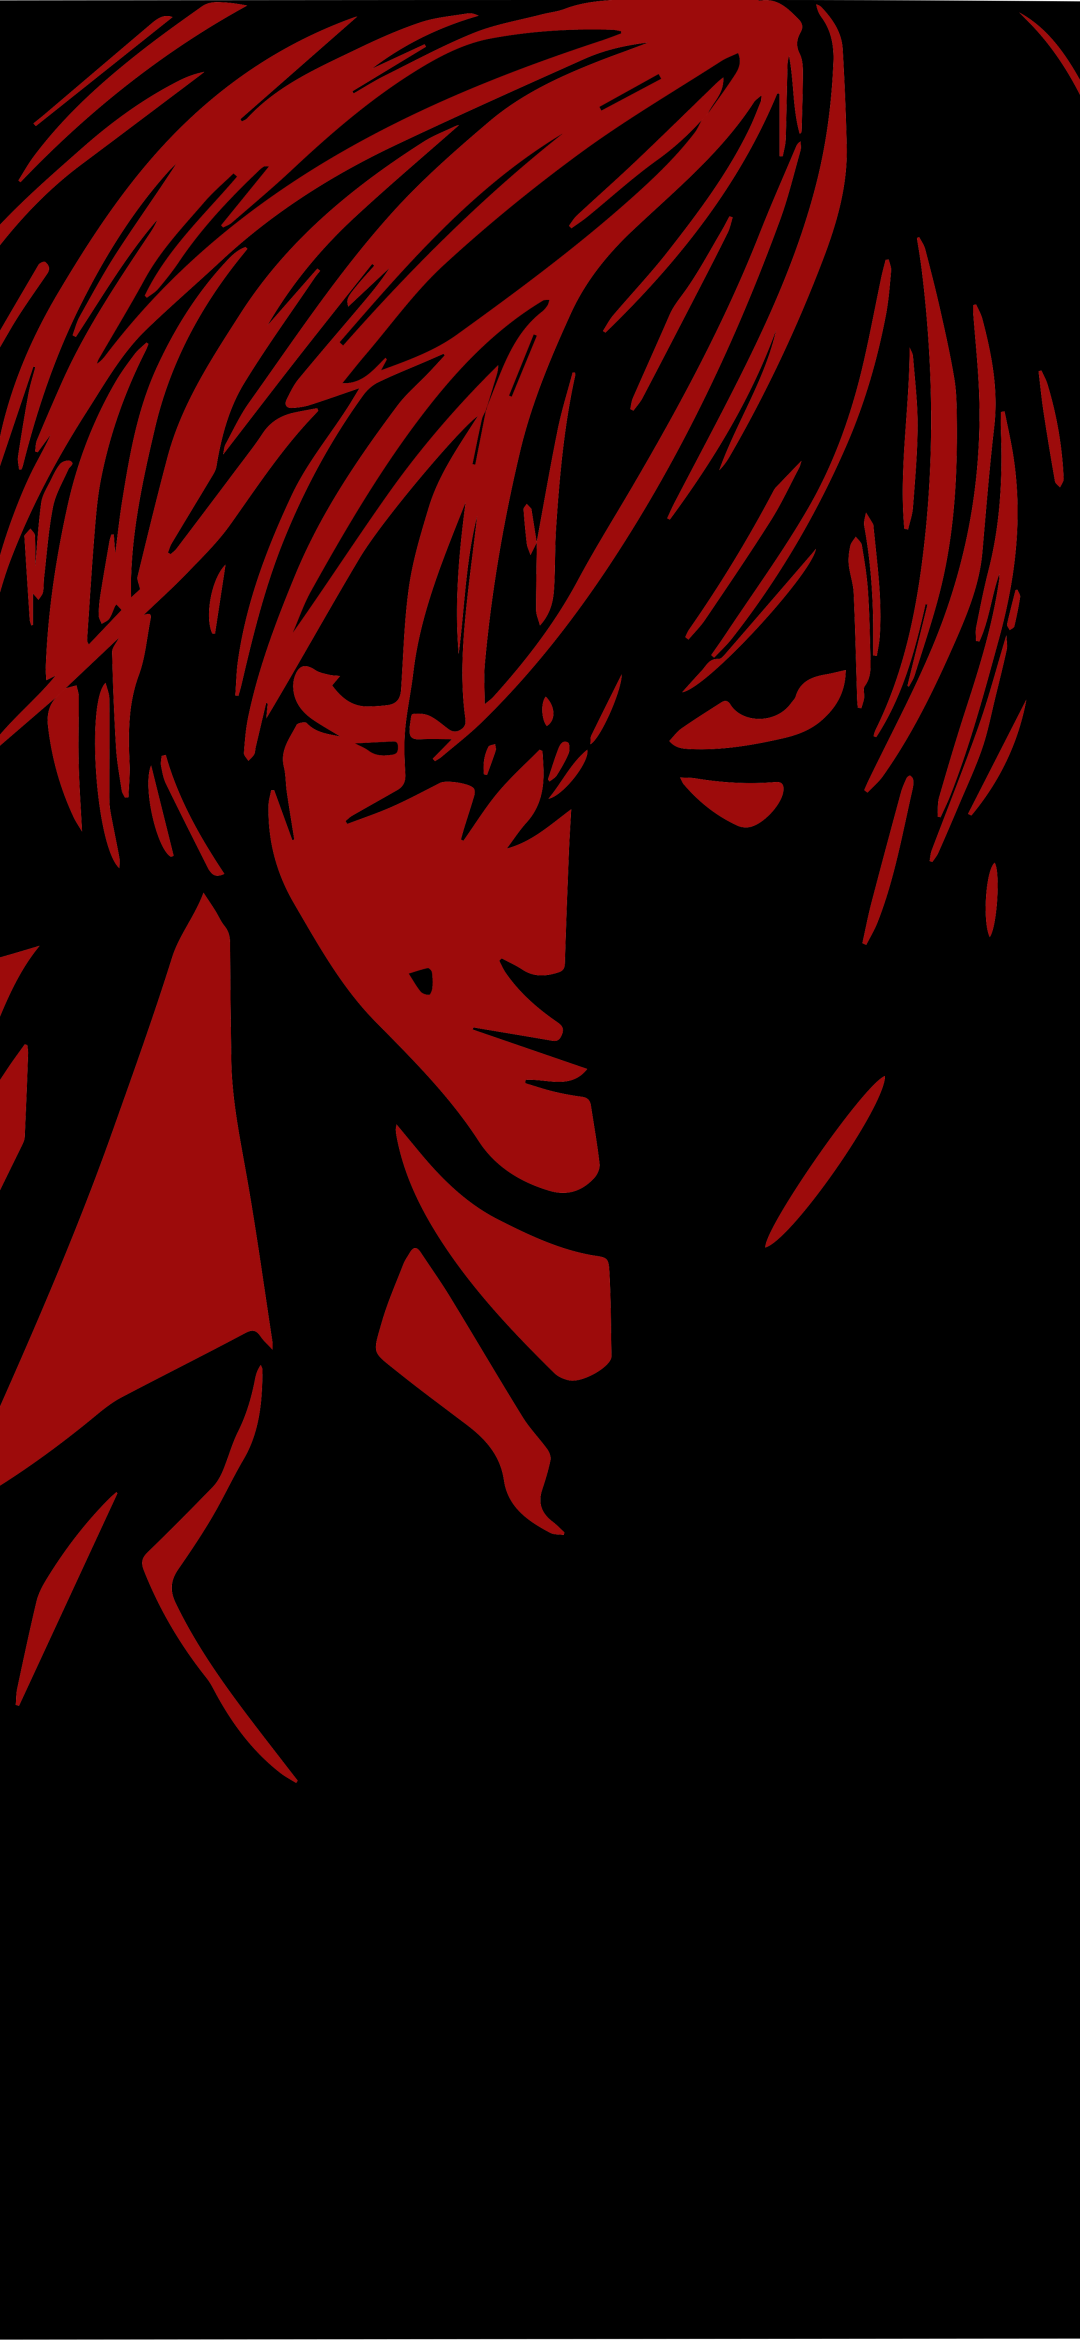 Death Note Mobile Wallpaper Light 1080x2340 Wallpaper Teahub Io Free death note cell phone wallpapers. death note mobile wallpaper light